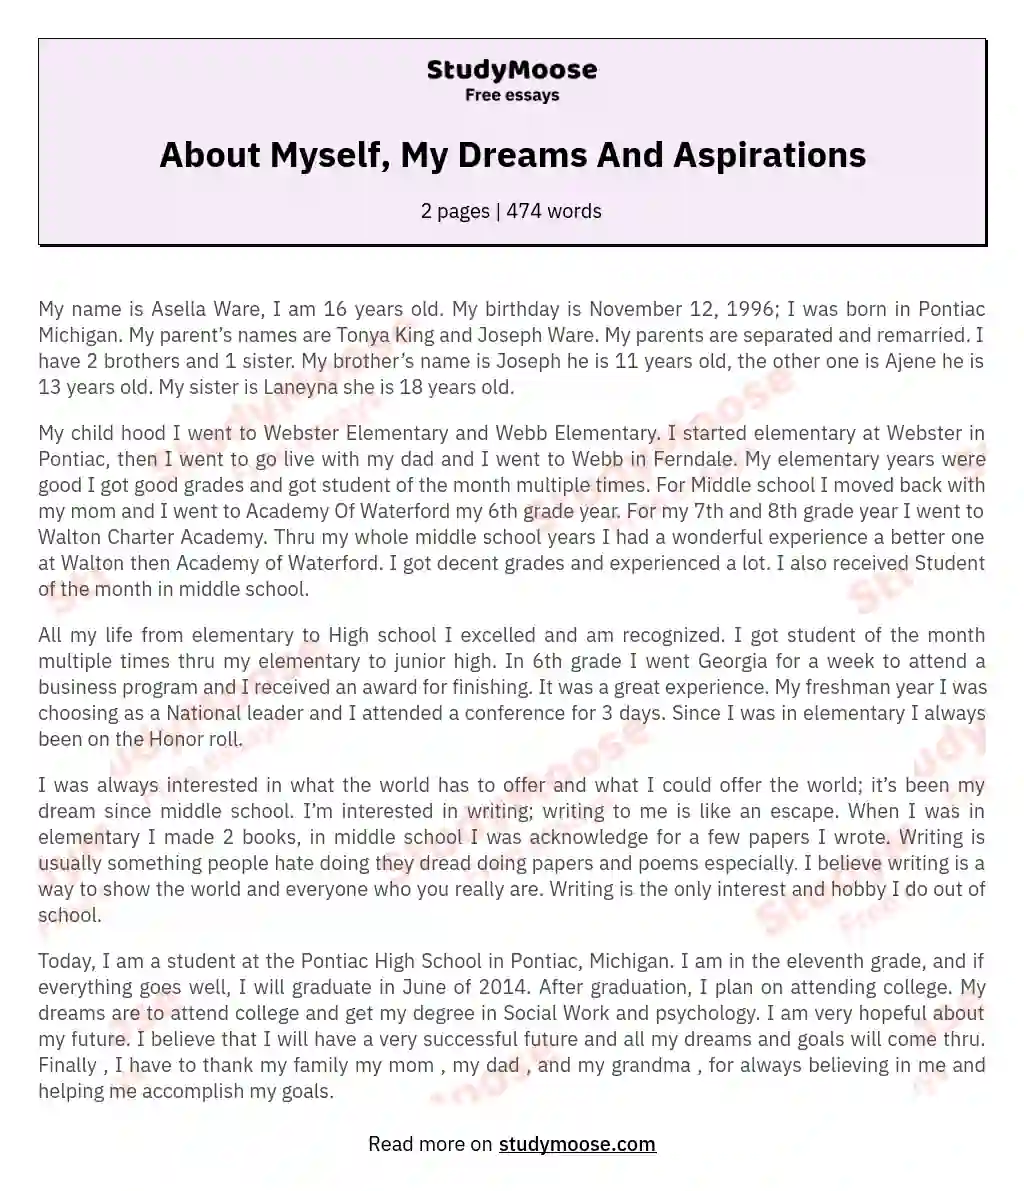 About Myself, My Dreams And Aspirations